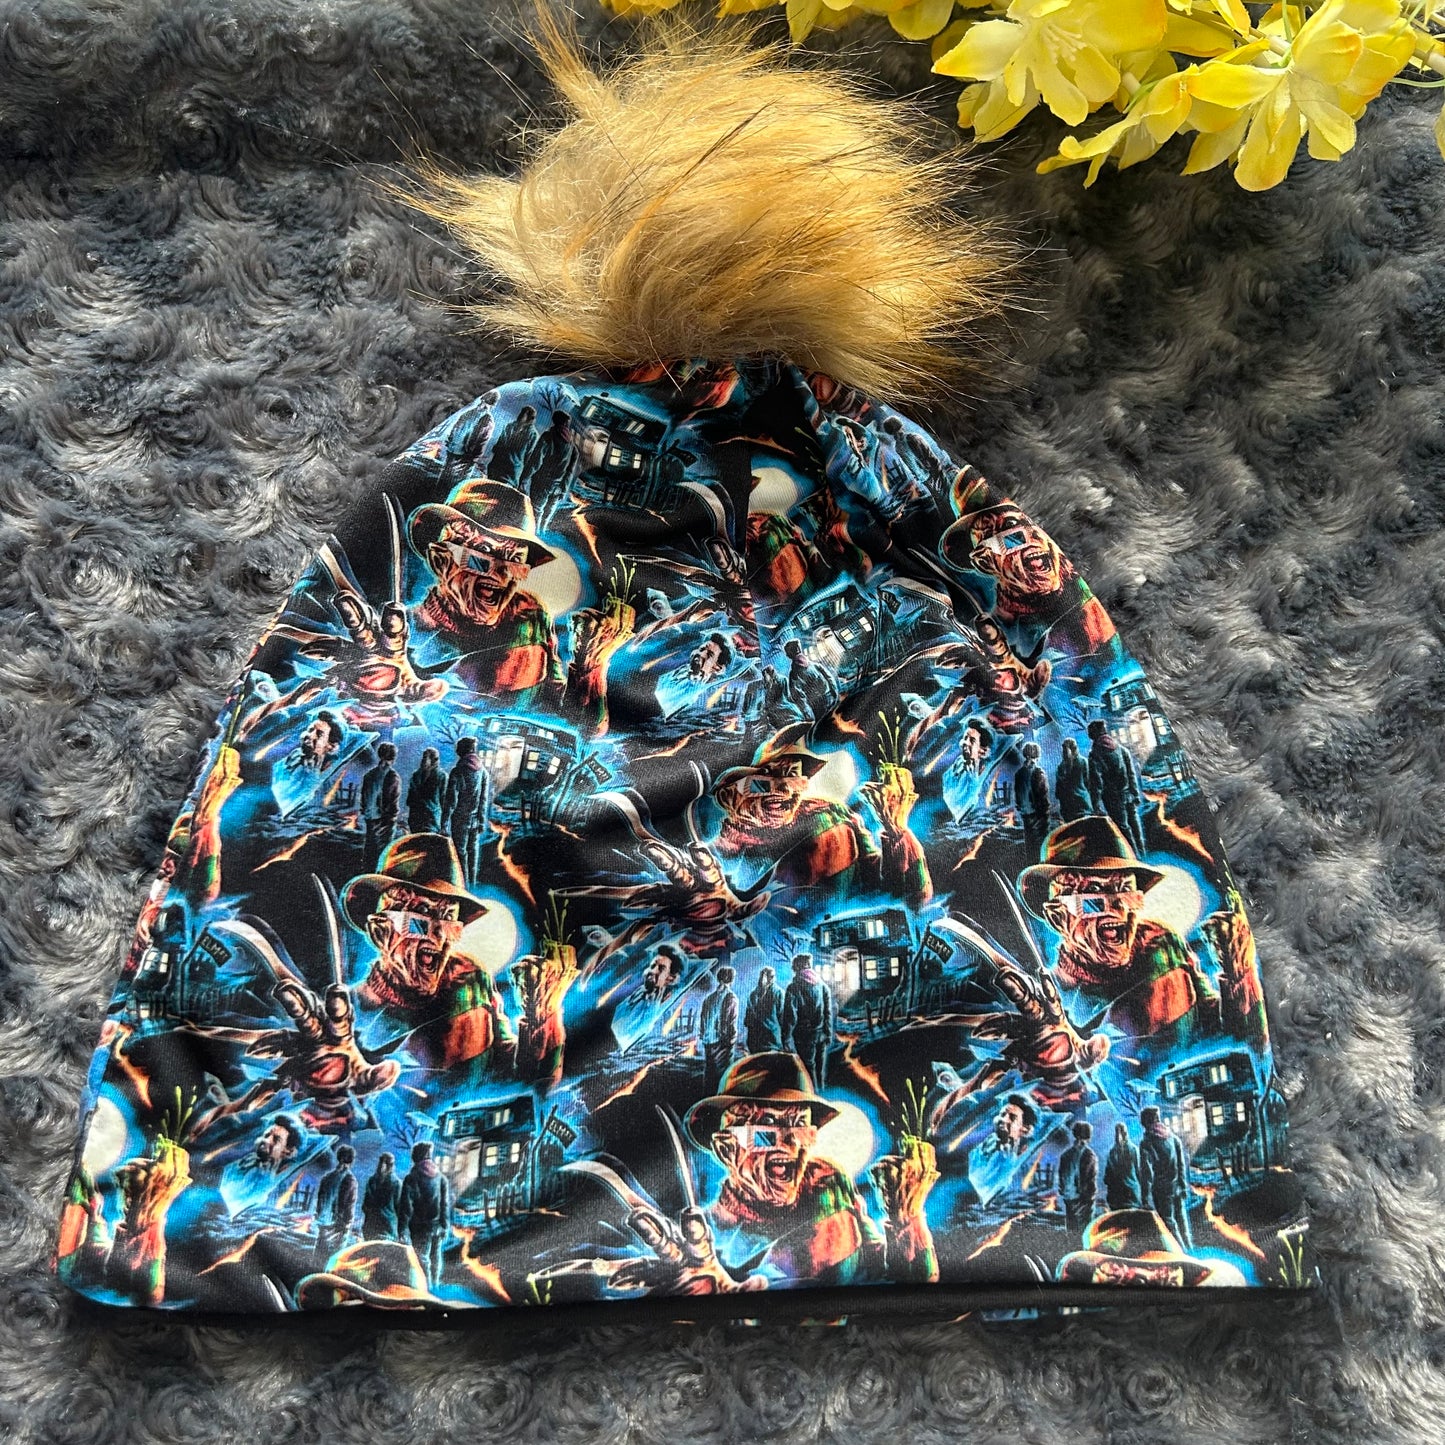 Tuque freddy willfée